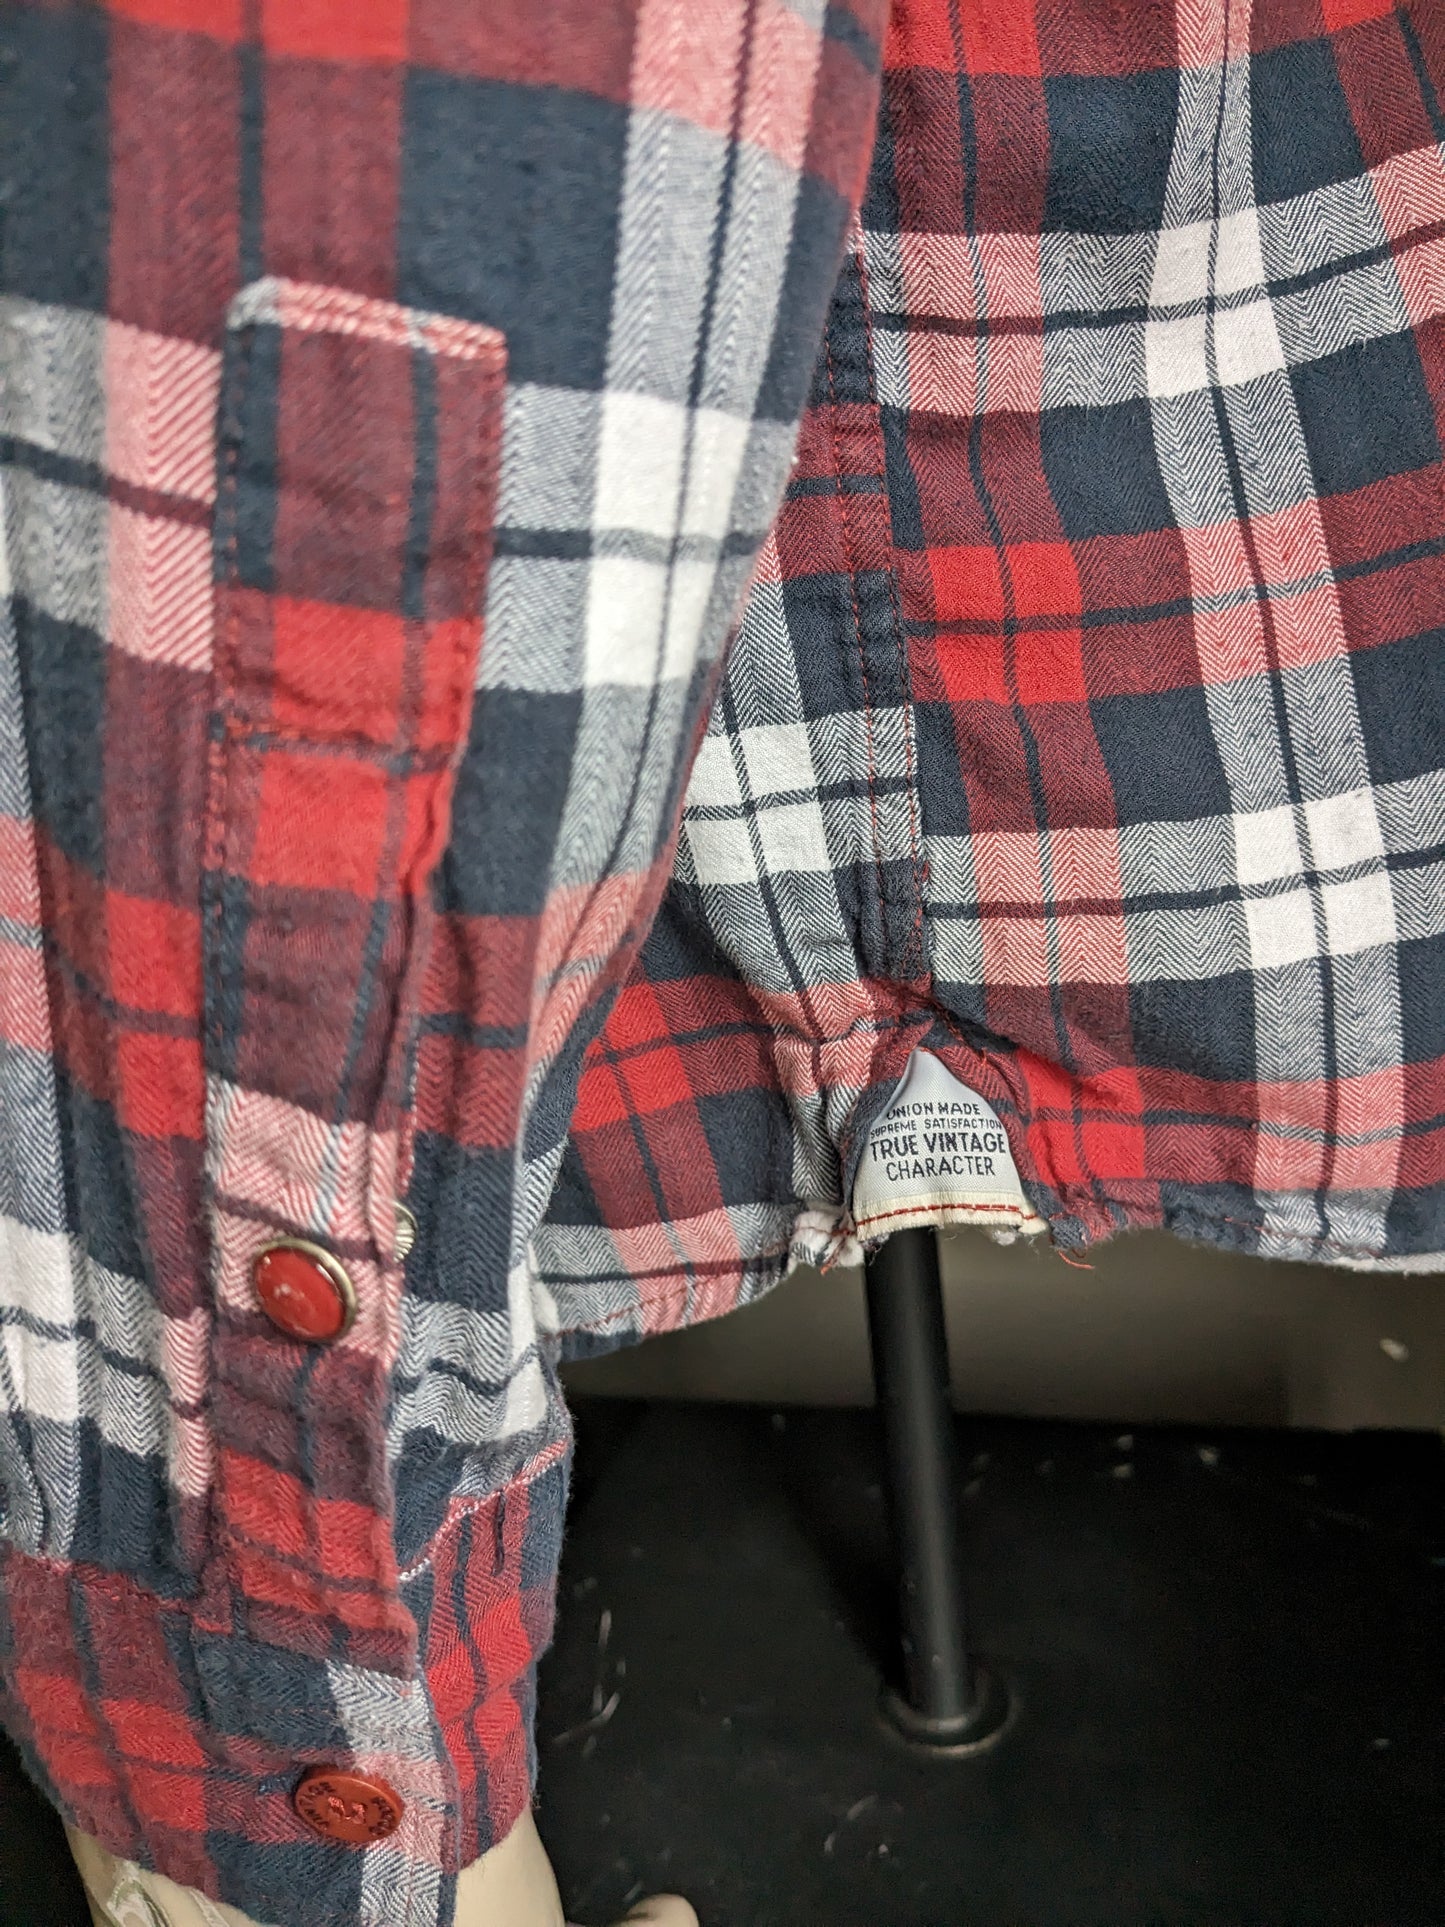 Dunnes flannel shirt. Gray white checkered. Size 2XL / XXL. Slim fit.